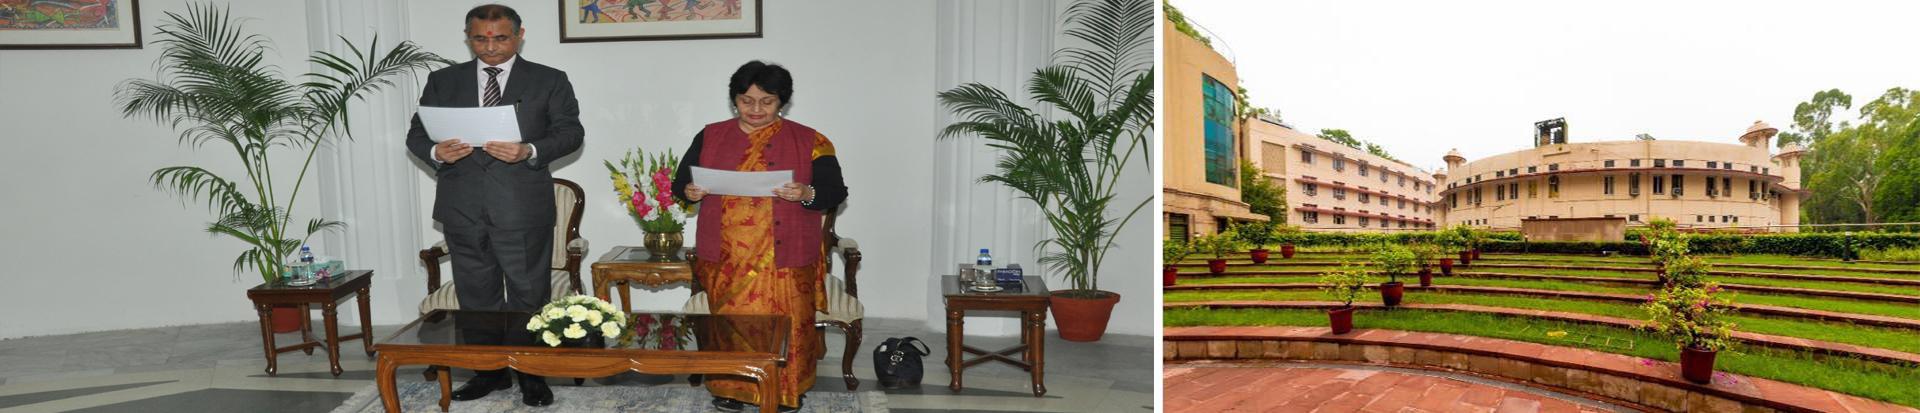 Dr. Manoj  Soni, Hon’ble Chairman, Union Public Service Commission administering the oath of office and secrecy to Mrs. Preeti Sudan on her appointment as an Hon’ble Member of the Commission on 29.11.2022 (FN) in the Central Hall, Dholpur House, New Delhi.